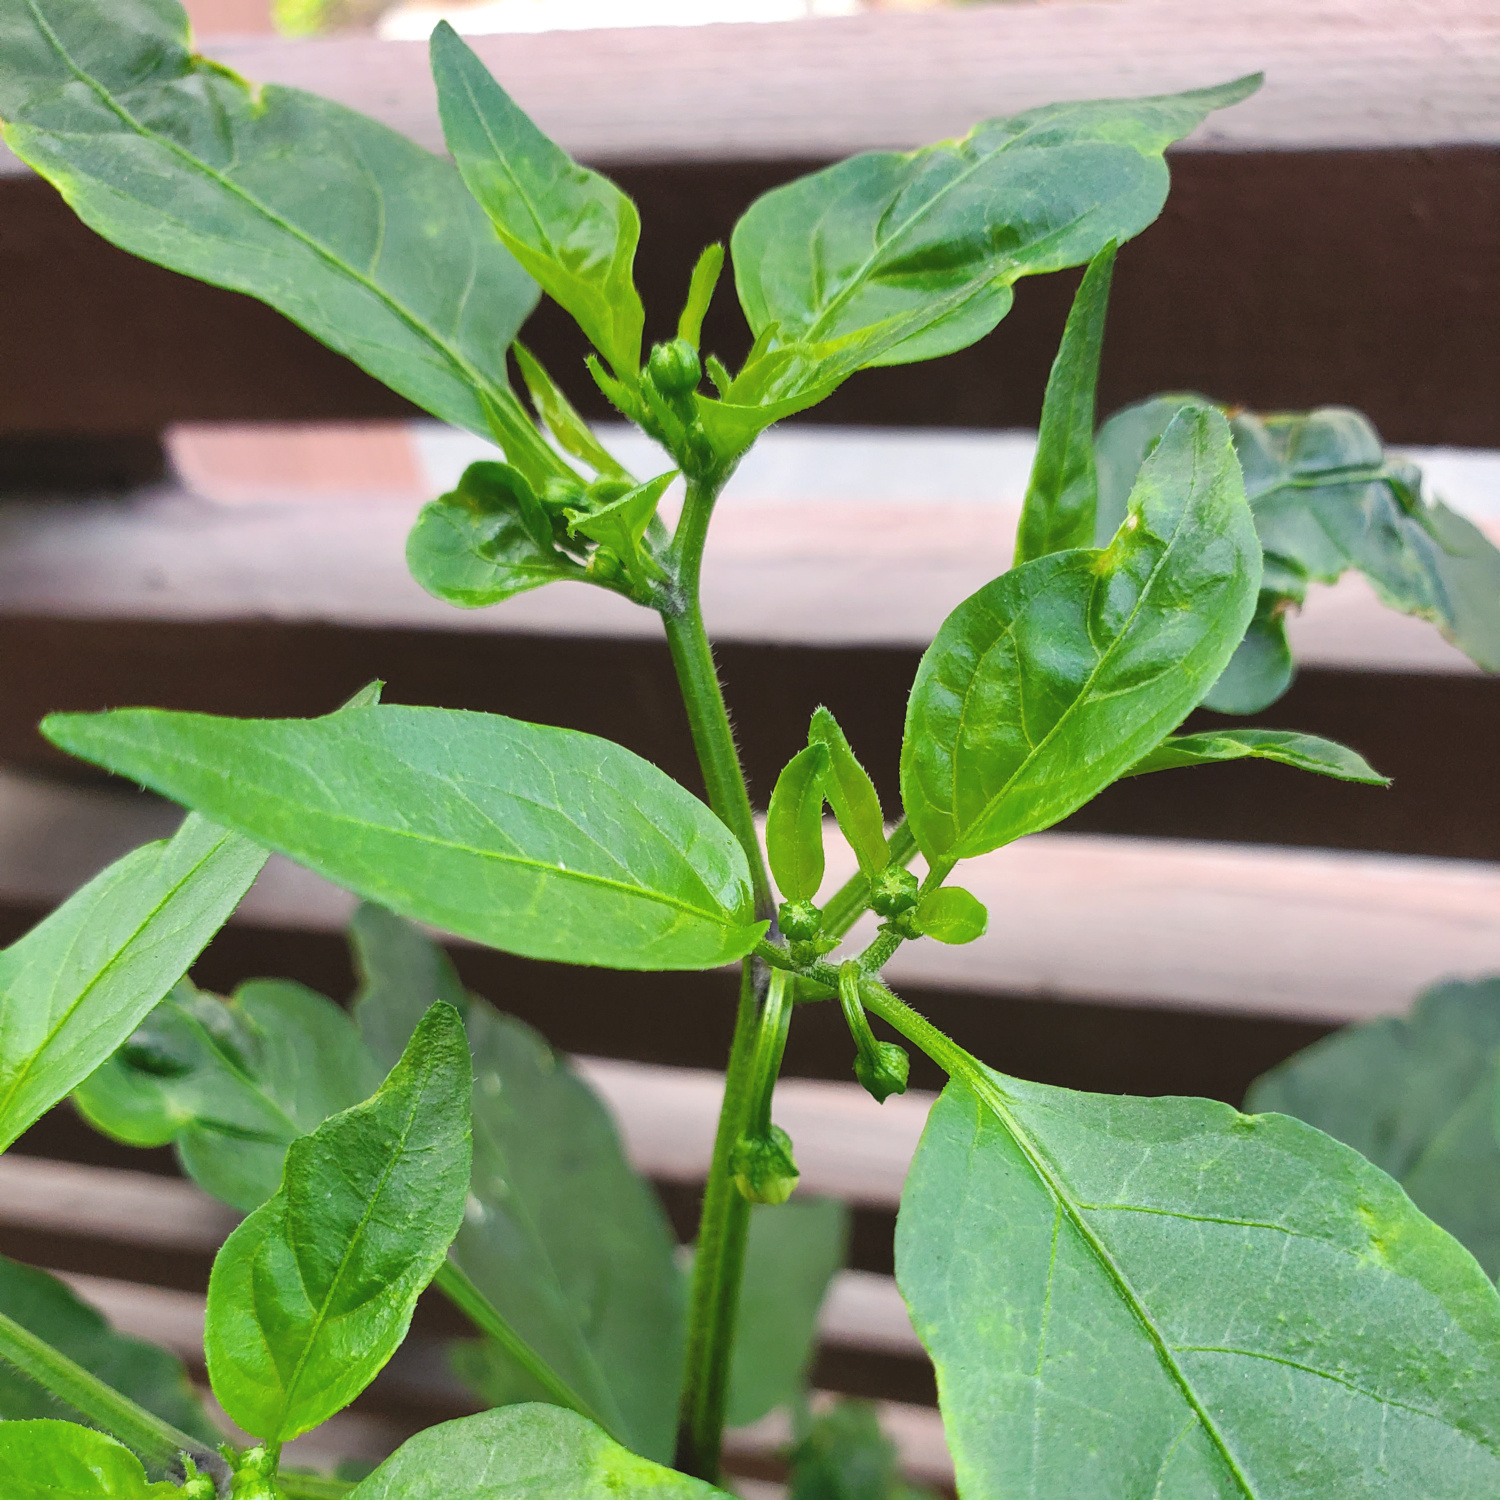 A new pepper plant is finally creating some flowers